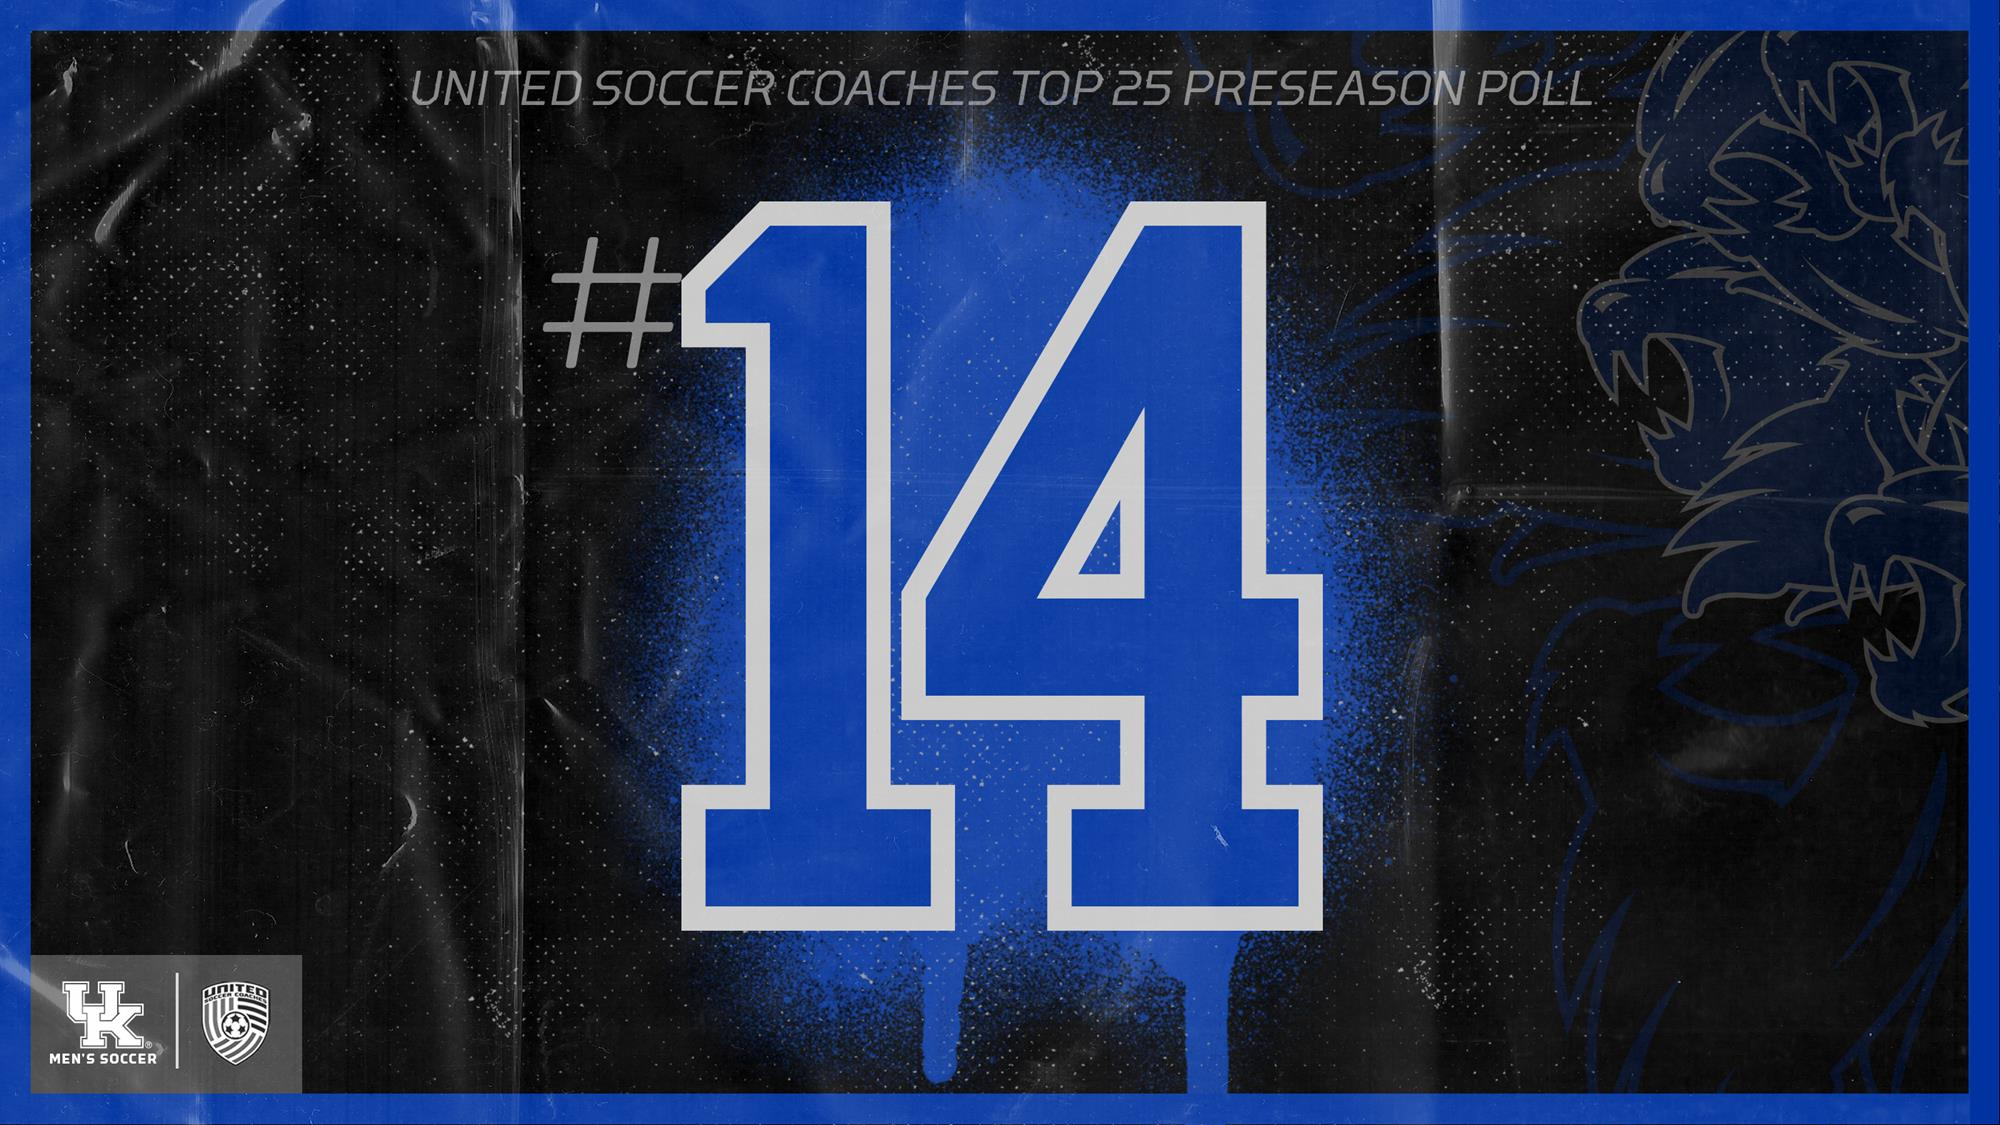 UK Men’s Soccer Ranked 14th by United Soccer Coaches